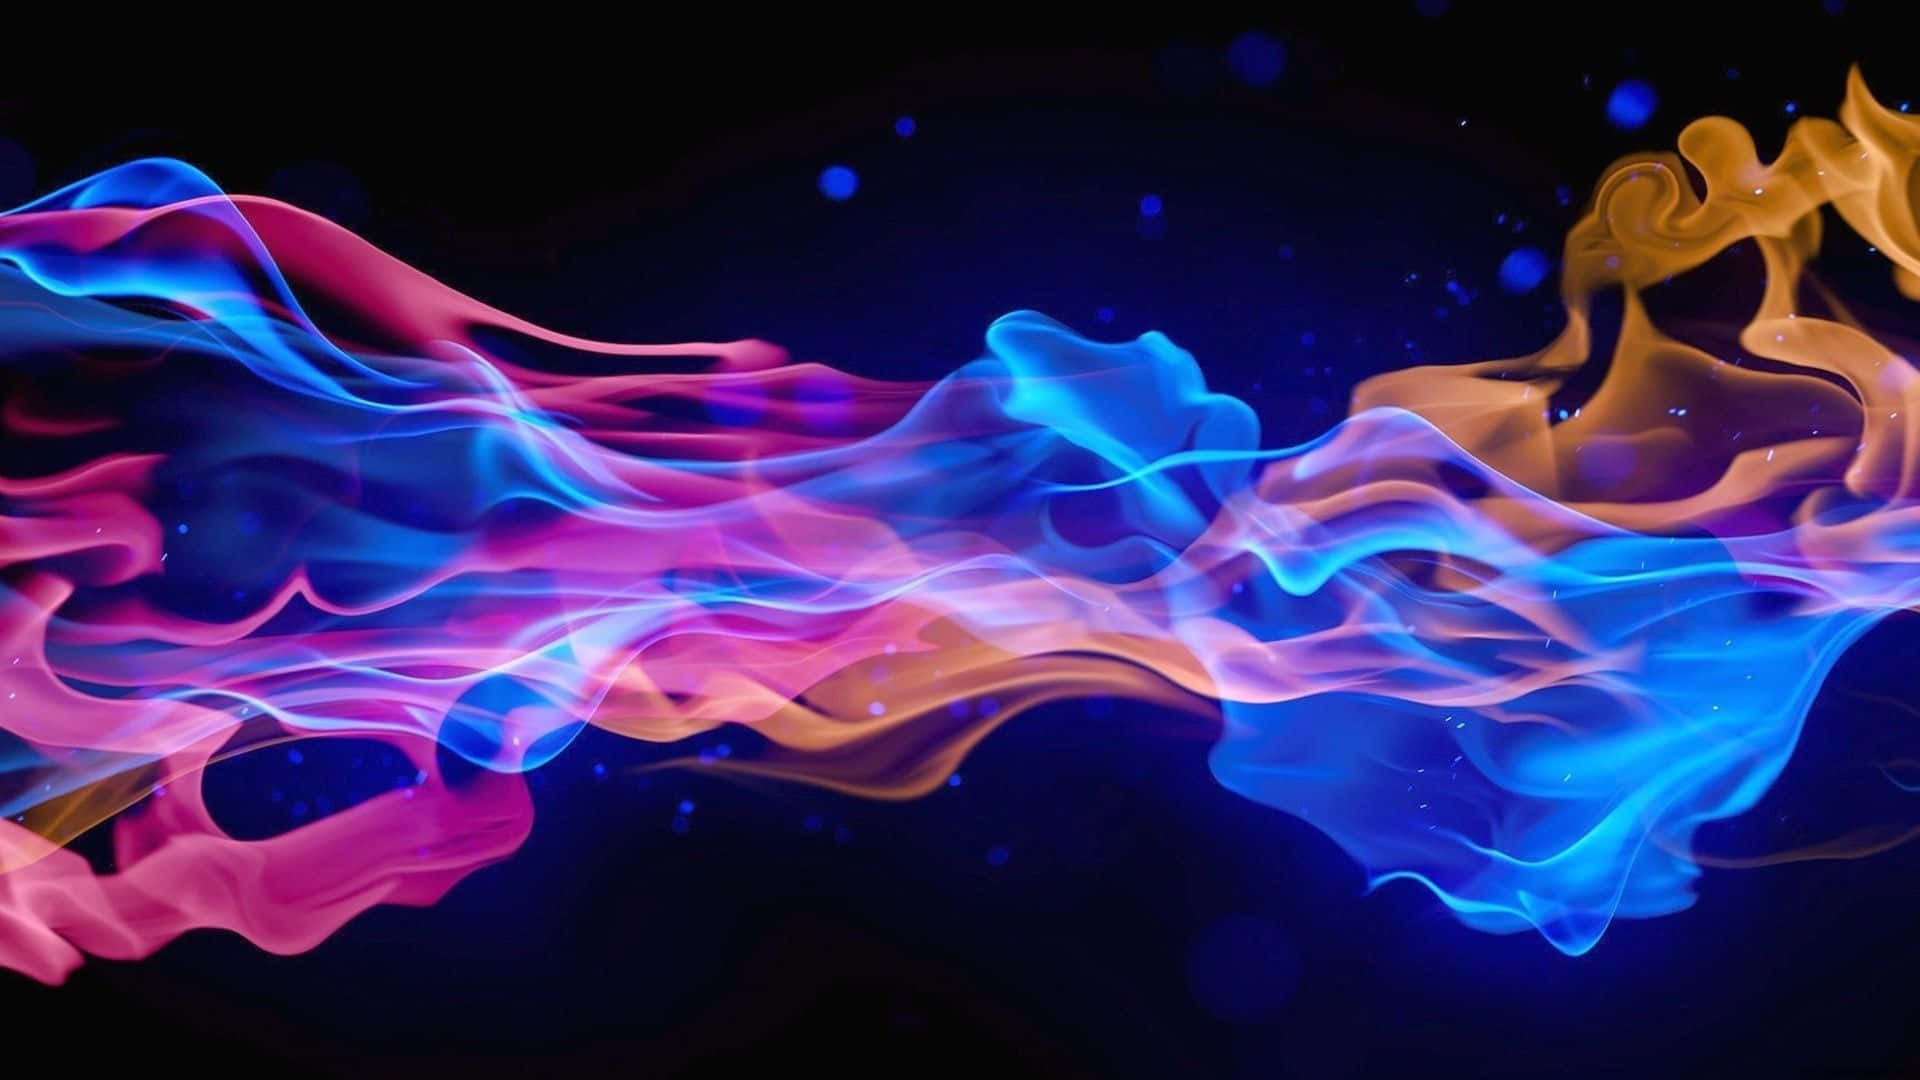 3d Flame Of Dynamic Blue Fire Background, Fire Flames, Fire, Flame  Background Image And Wallpaper for Free Download